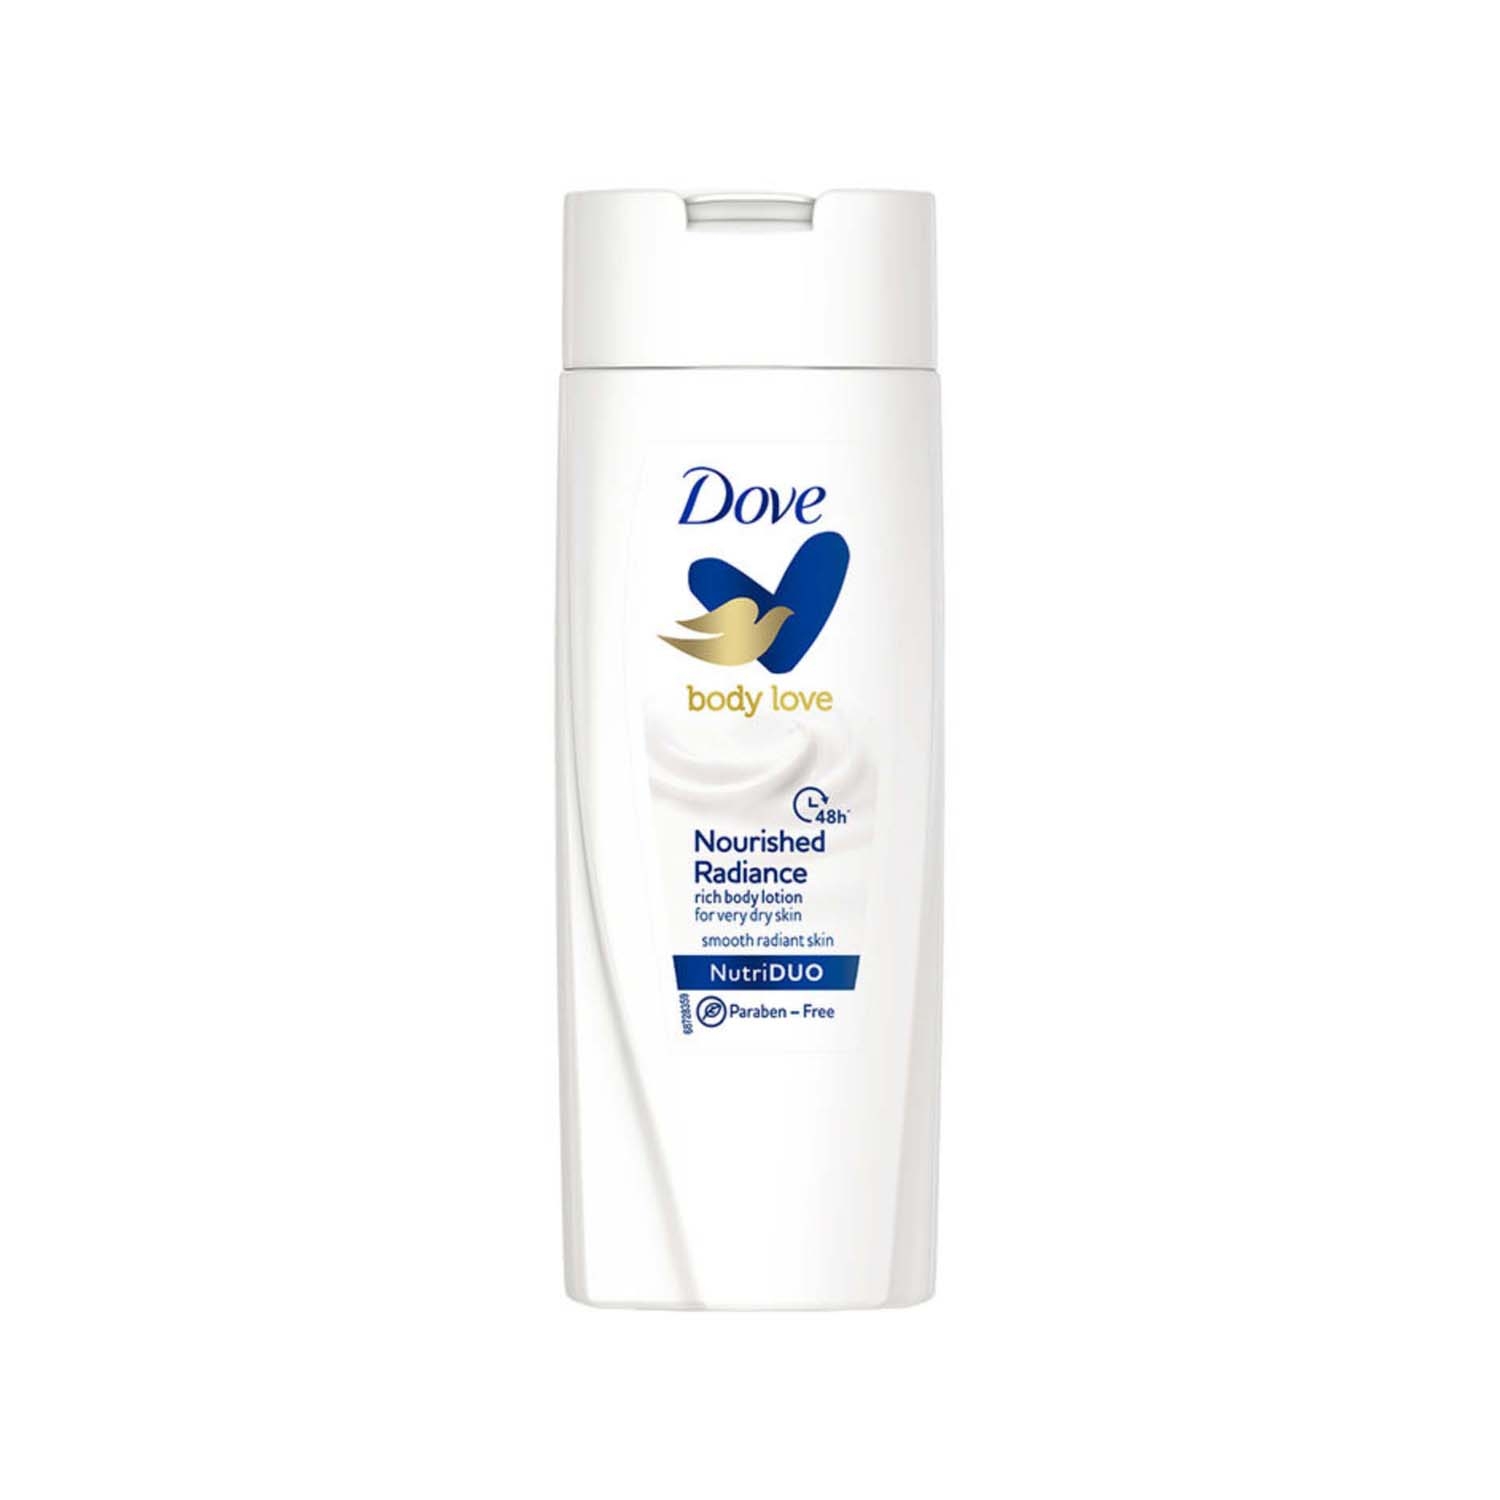 Dove Body Love Nourished Radiance Body Lotion (100ml)